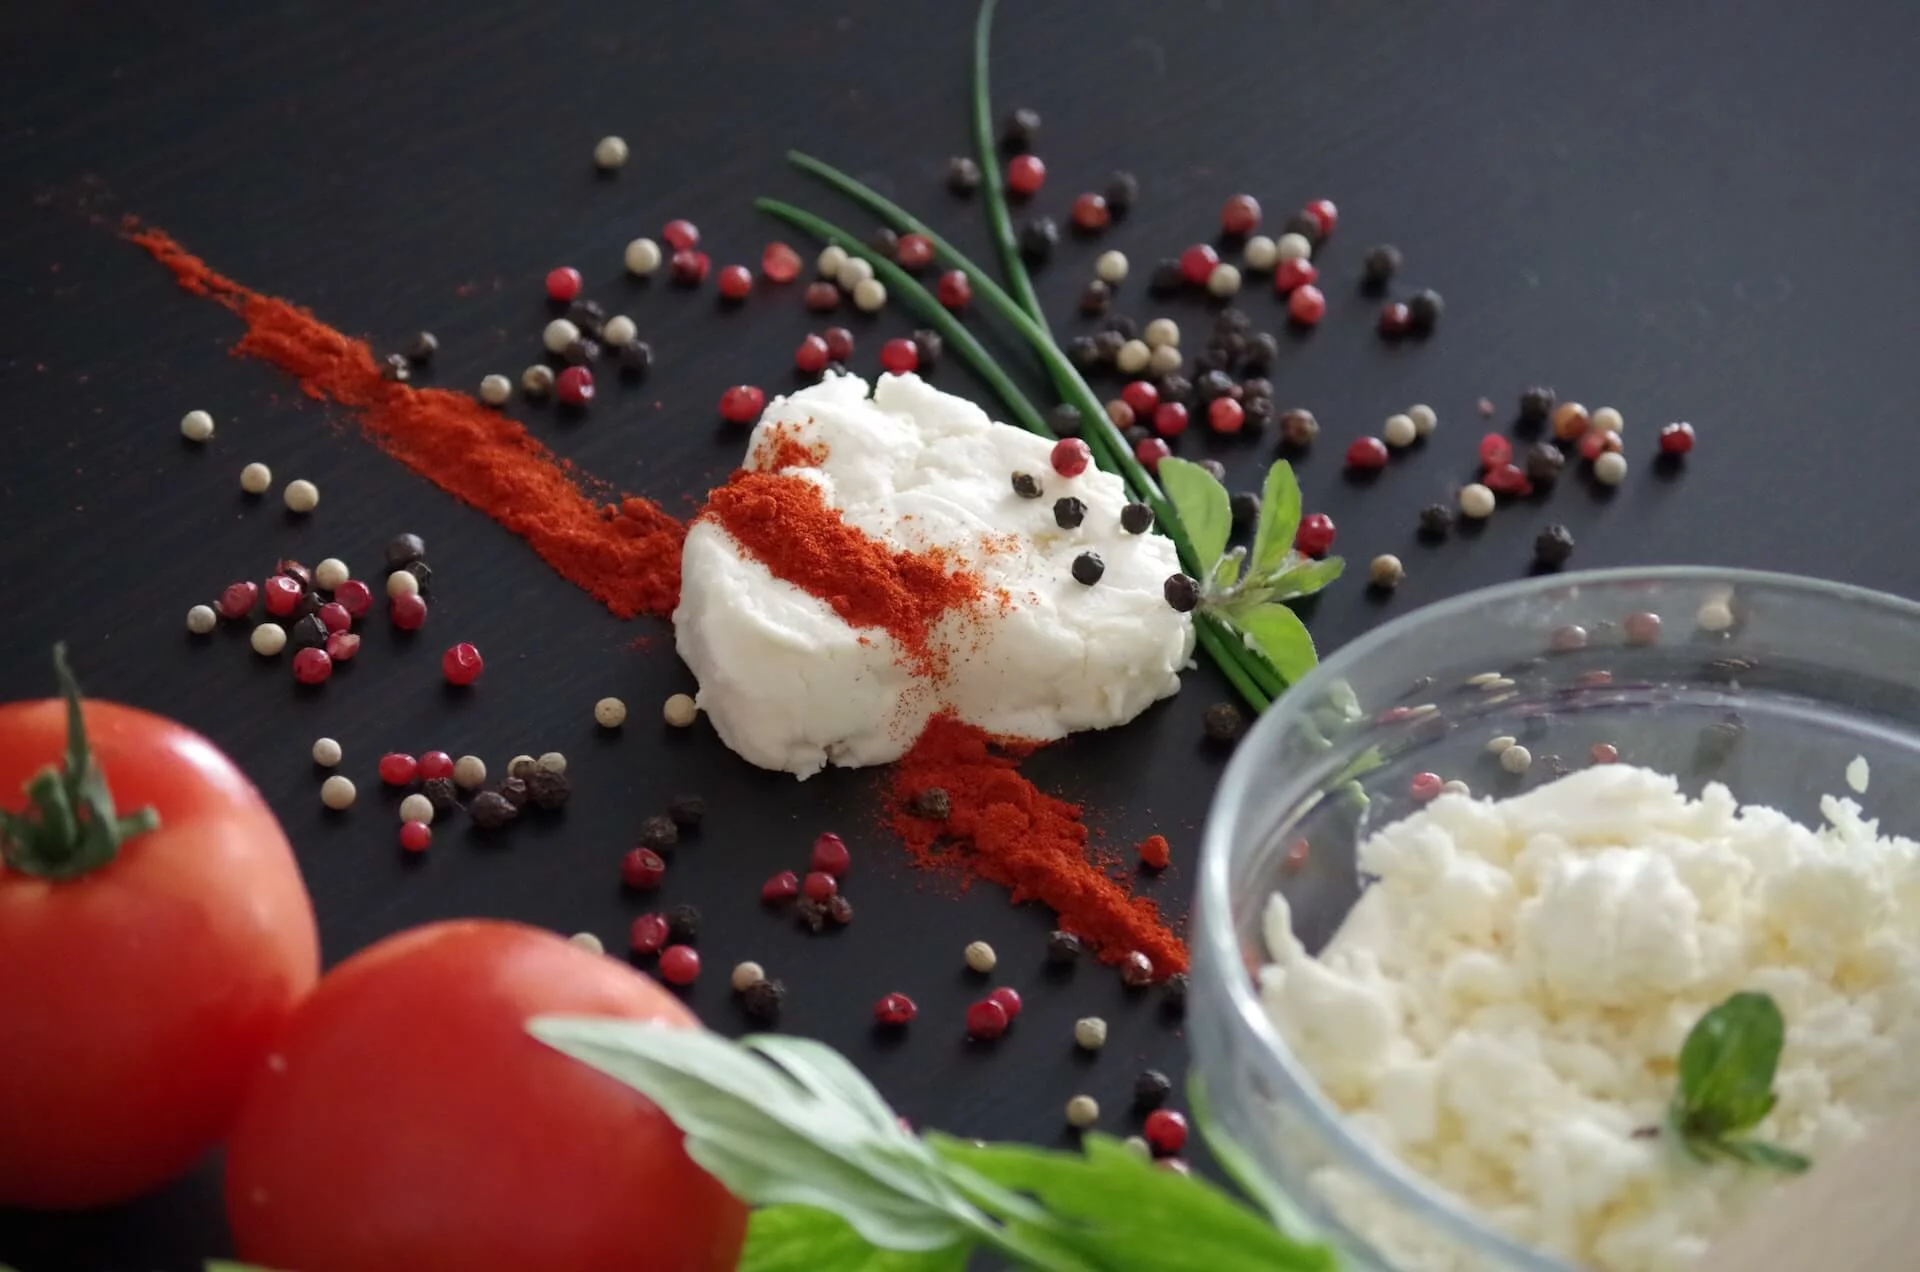 cottage cheese and tomatoes